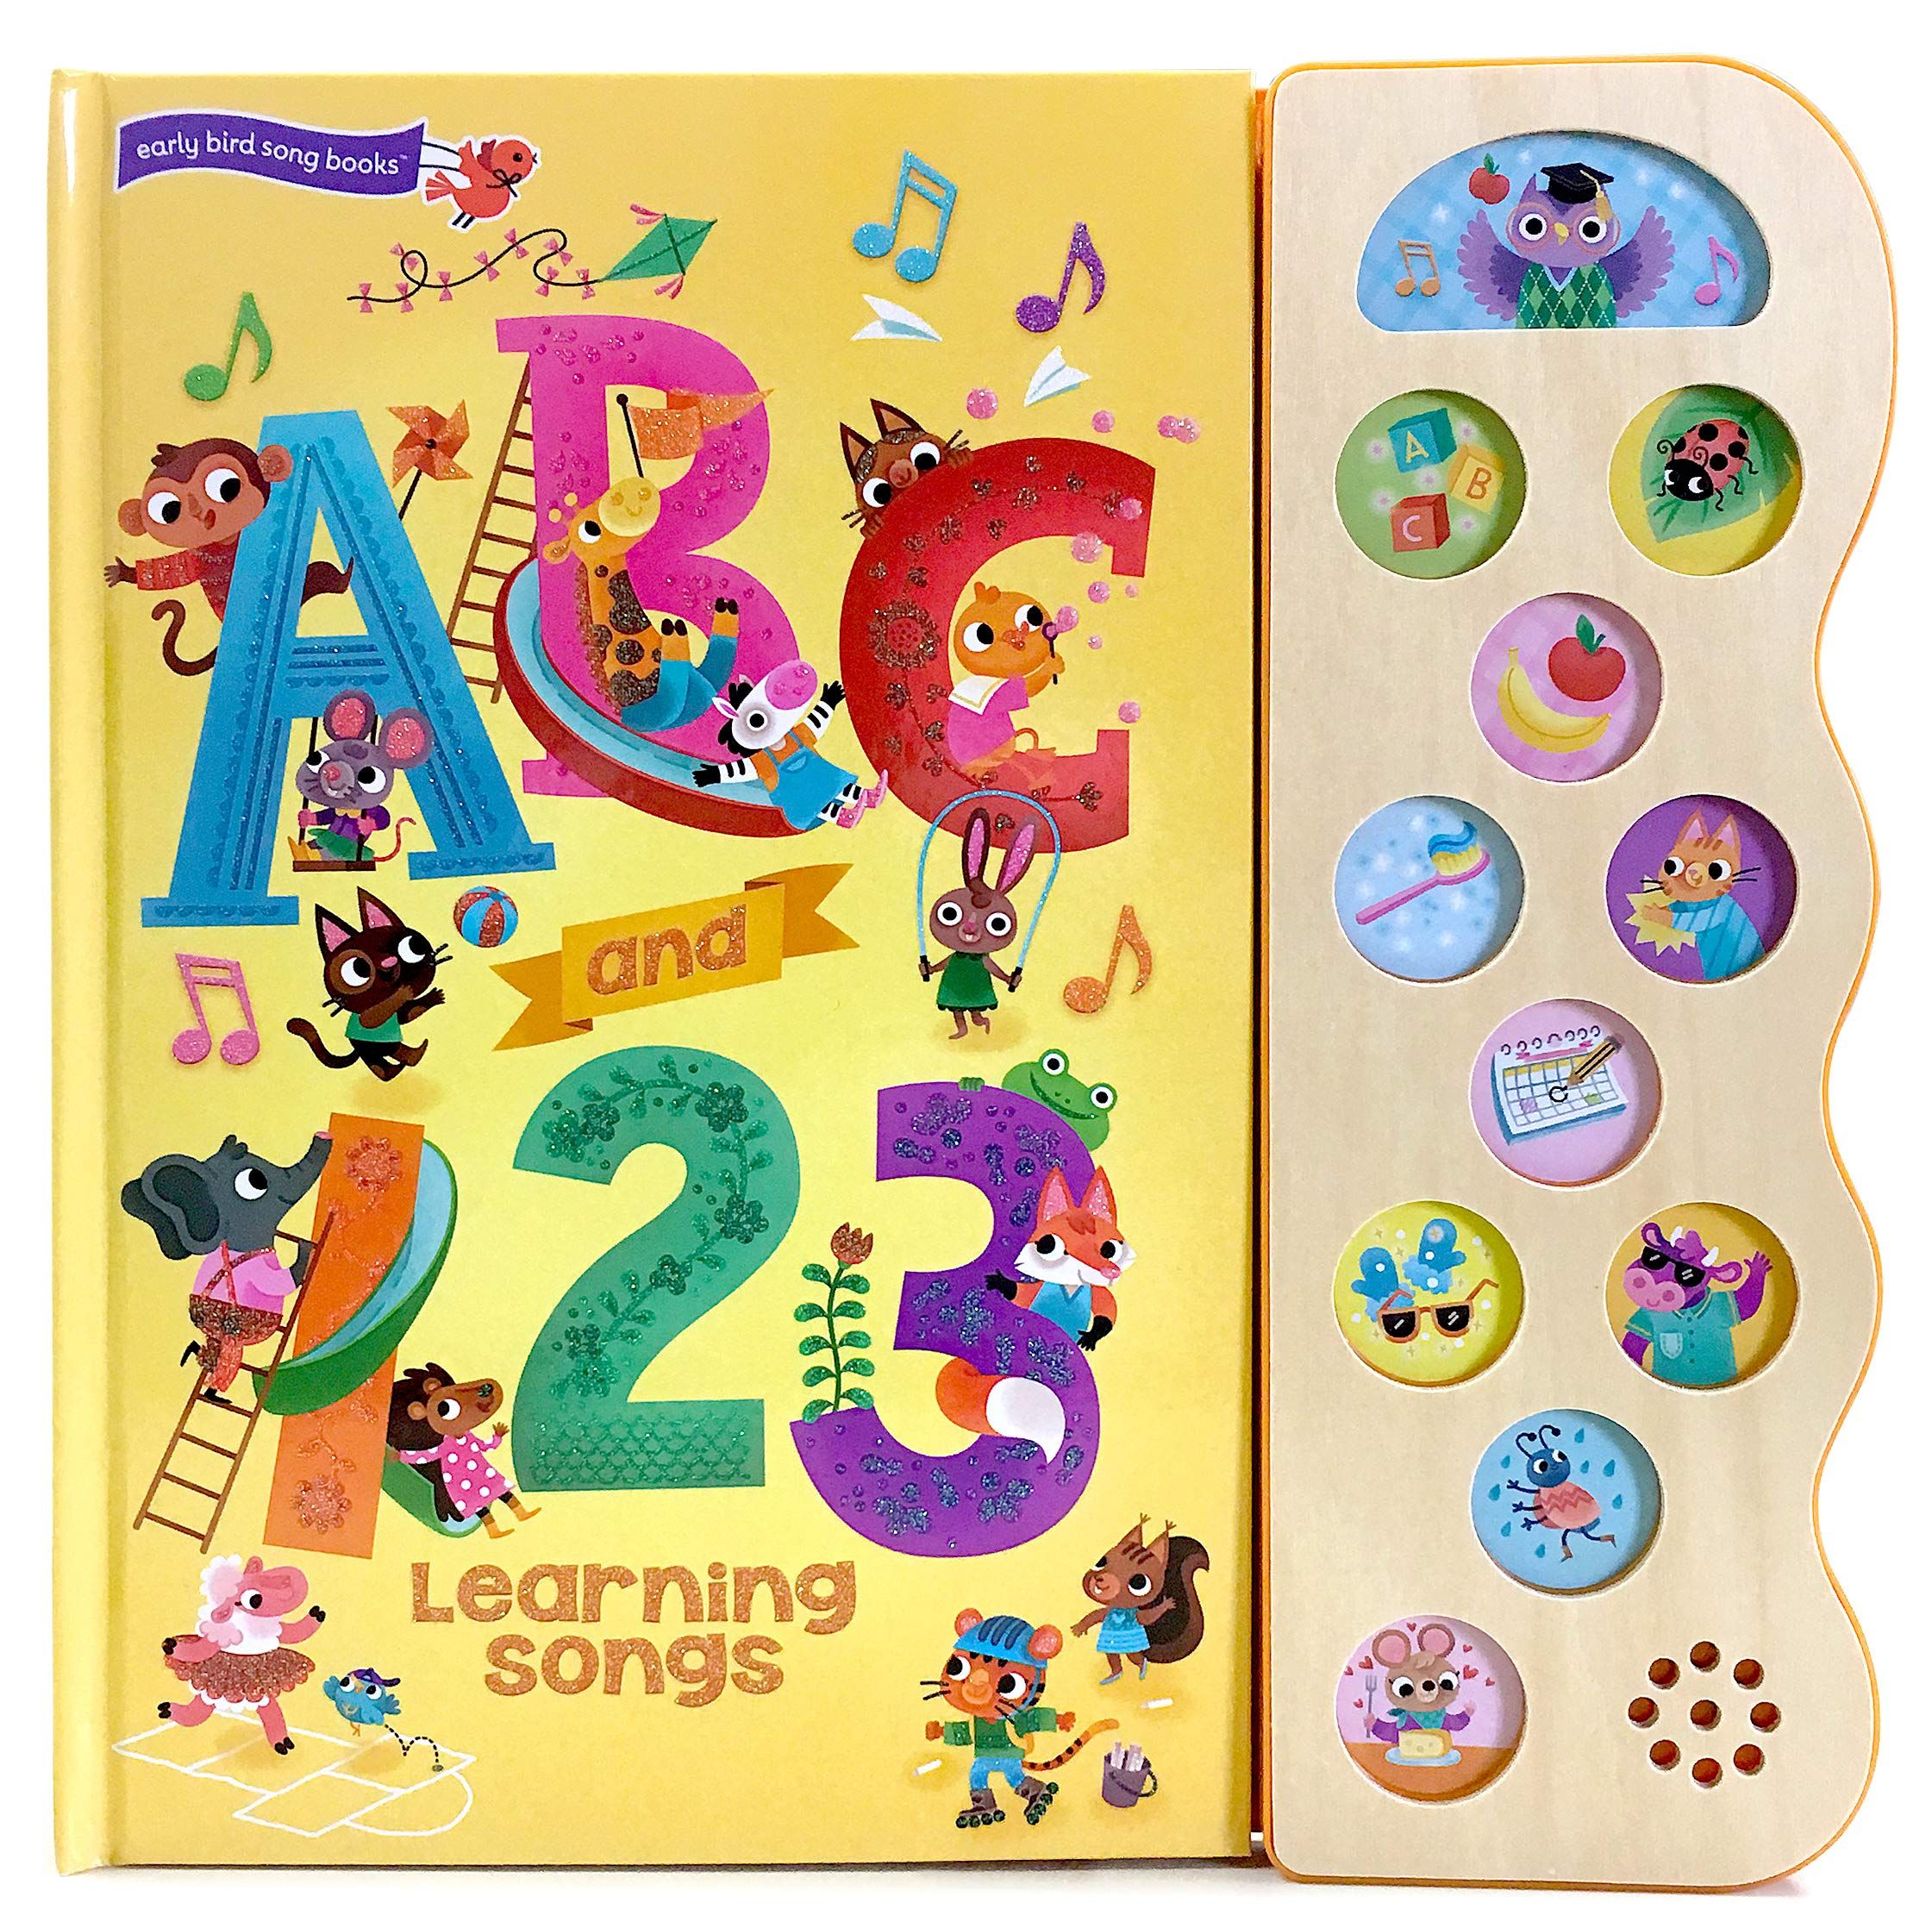 Cover of the ABC book and 123 songs to learn